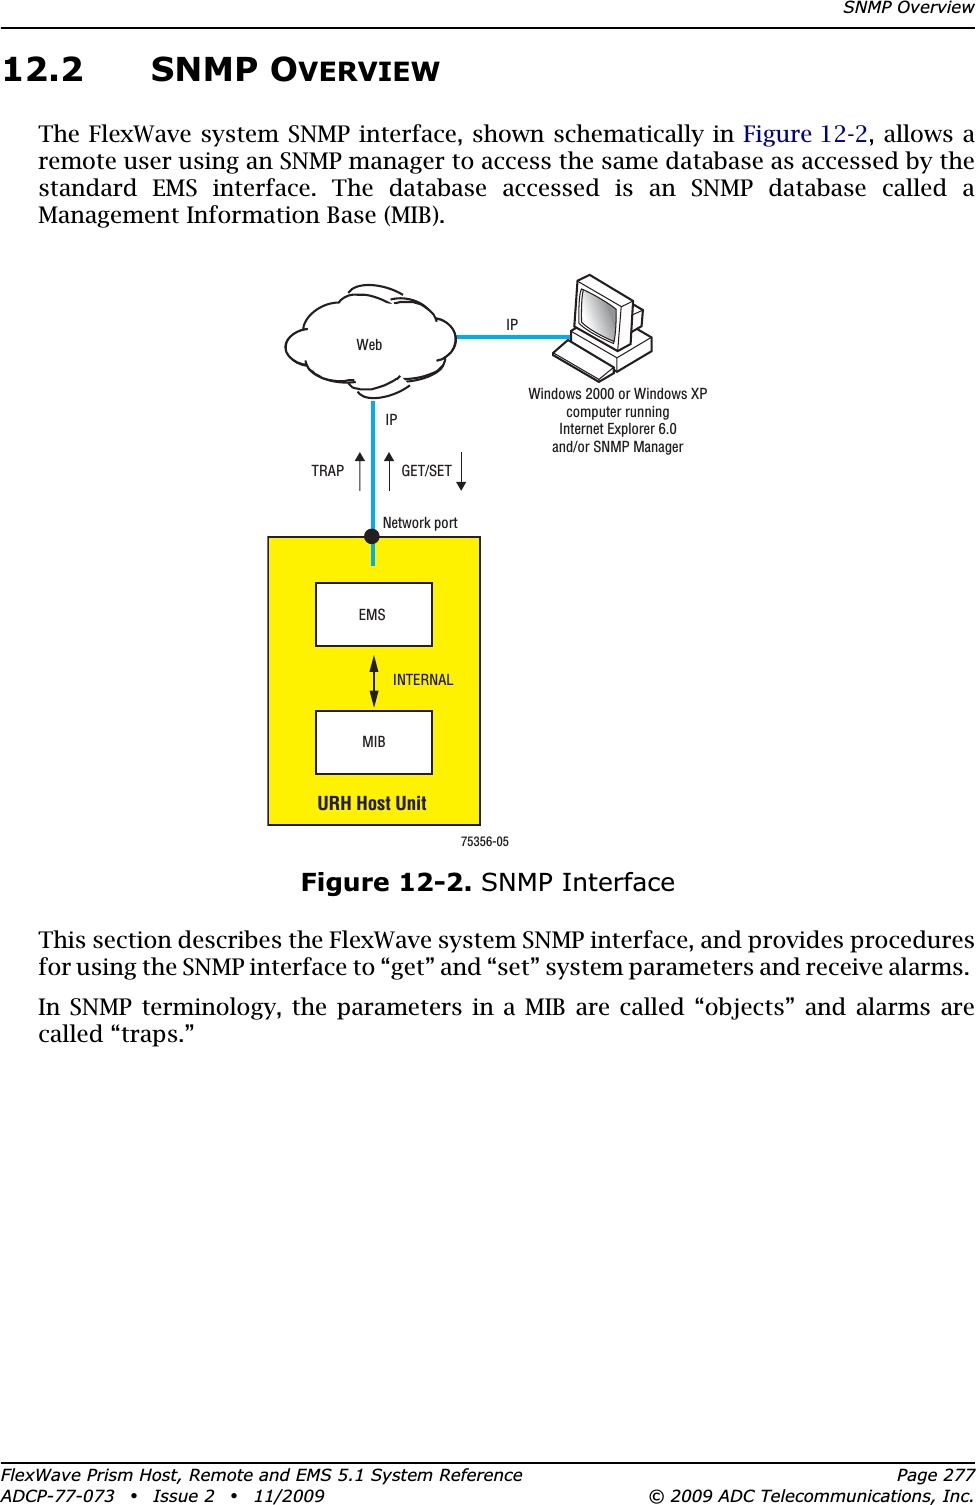 SNMP OverviewFlexWave Prism Host, Remote and EMS 5.1 System Reference Page 277ADCP-77-073 • Issue 2 • 11/2009 © 2009 ADC Telecommunications, Inc.12.2 SNMP OVERVIEWThe FlexWave system SNMP interface, shown schematically in Figure 12-2, allows a remote user using an SNMP manager to access the same database as accessed by the standard EMS interface. The database accessed is an SNMP database called a Management Information Base (MIB).Figure 12-2. SNMP InterfaceThis section describes the FlexWave system SNMP interface, and provides proceduresfor using the SNMP interface to “get” and “set” system parameters and receive alarms. In SNMP terminology, the parameters in a MIB are called “objects” and alarms are called “traps.”IPIPWebGET/SETTRAP75356-05Windows 2000 or Windows XPcomputer runningInternet Explorer 6.0and/or SNMP ManagerMIBEMSINTERNALNetwork portURH Host Unit